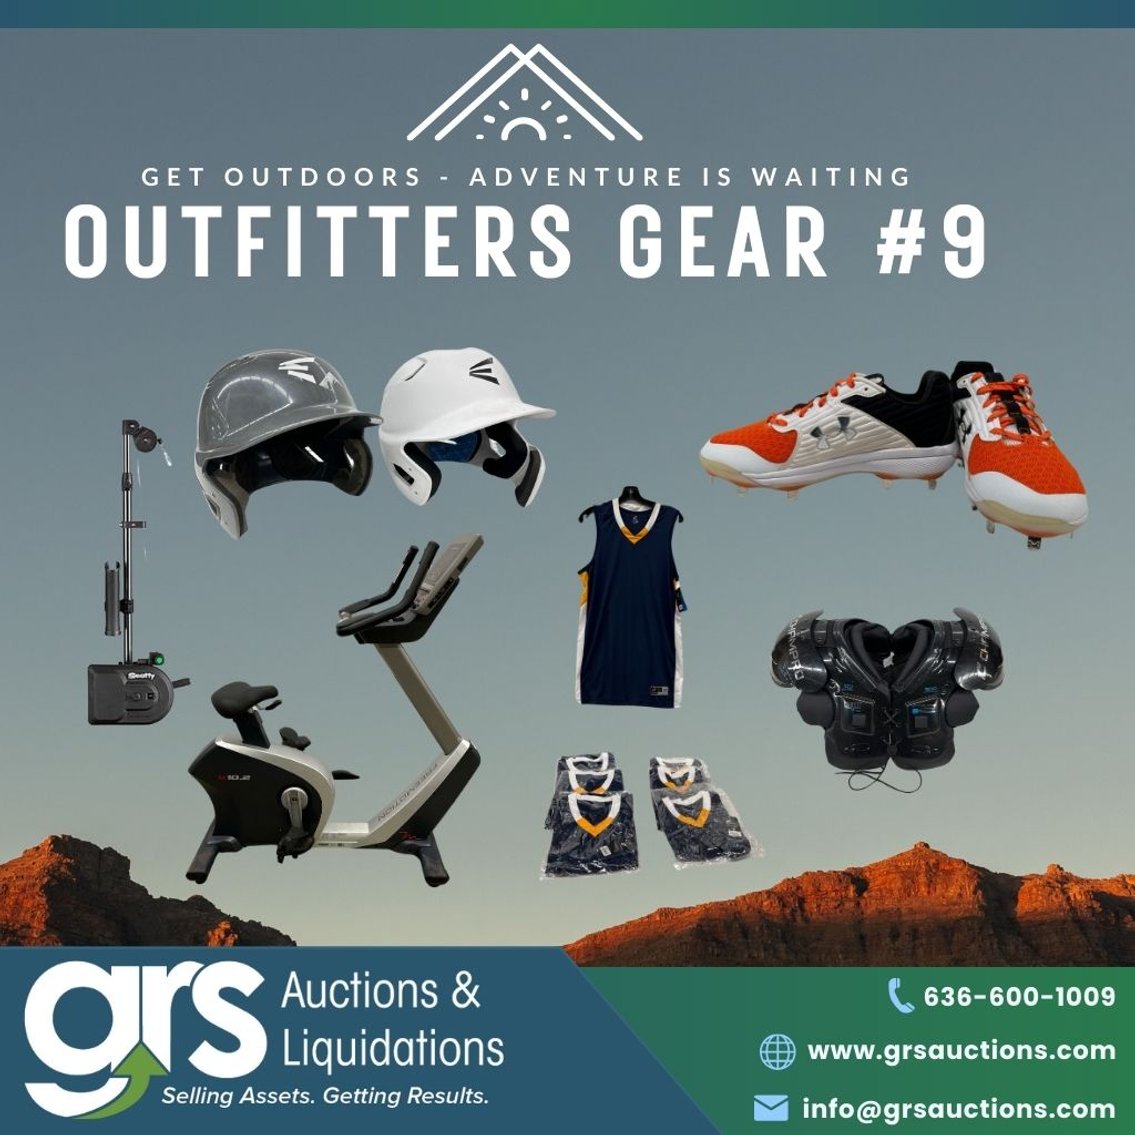 Outfitters Gear & Sporting #10